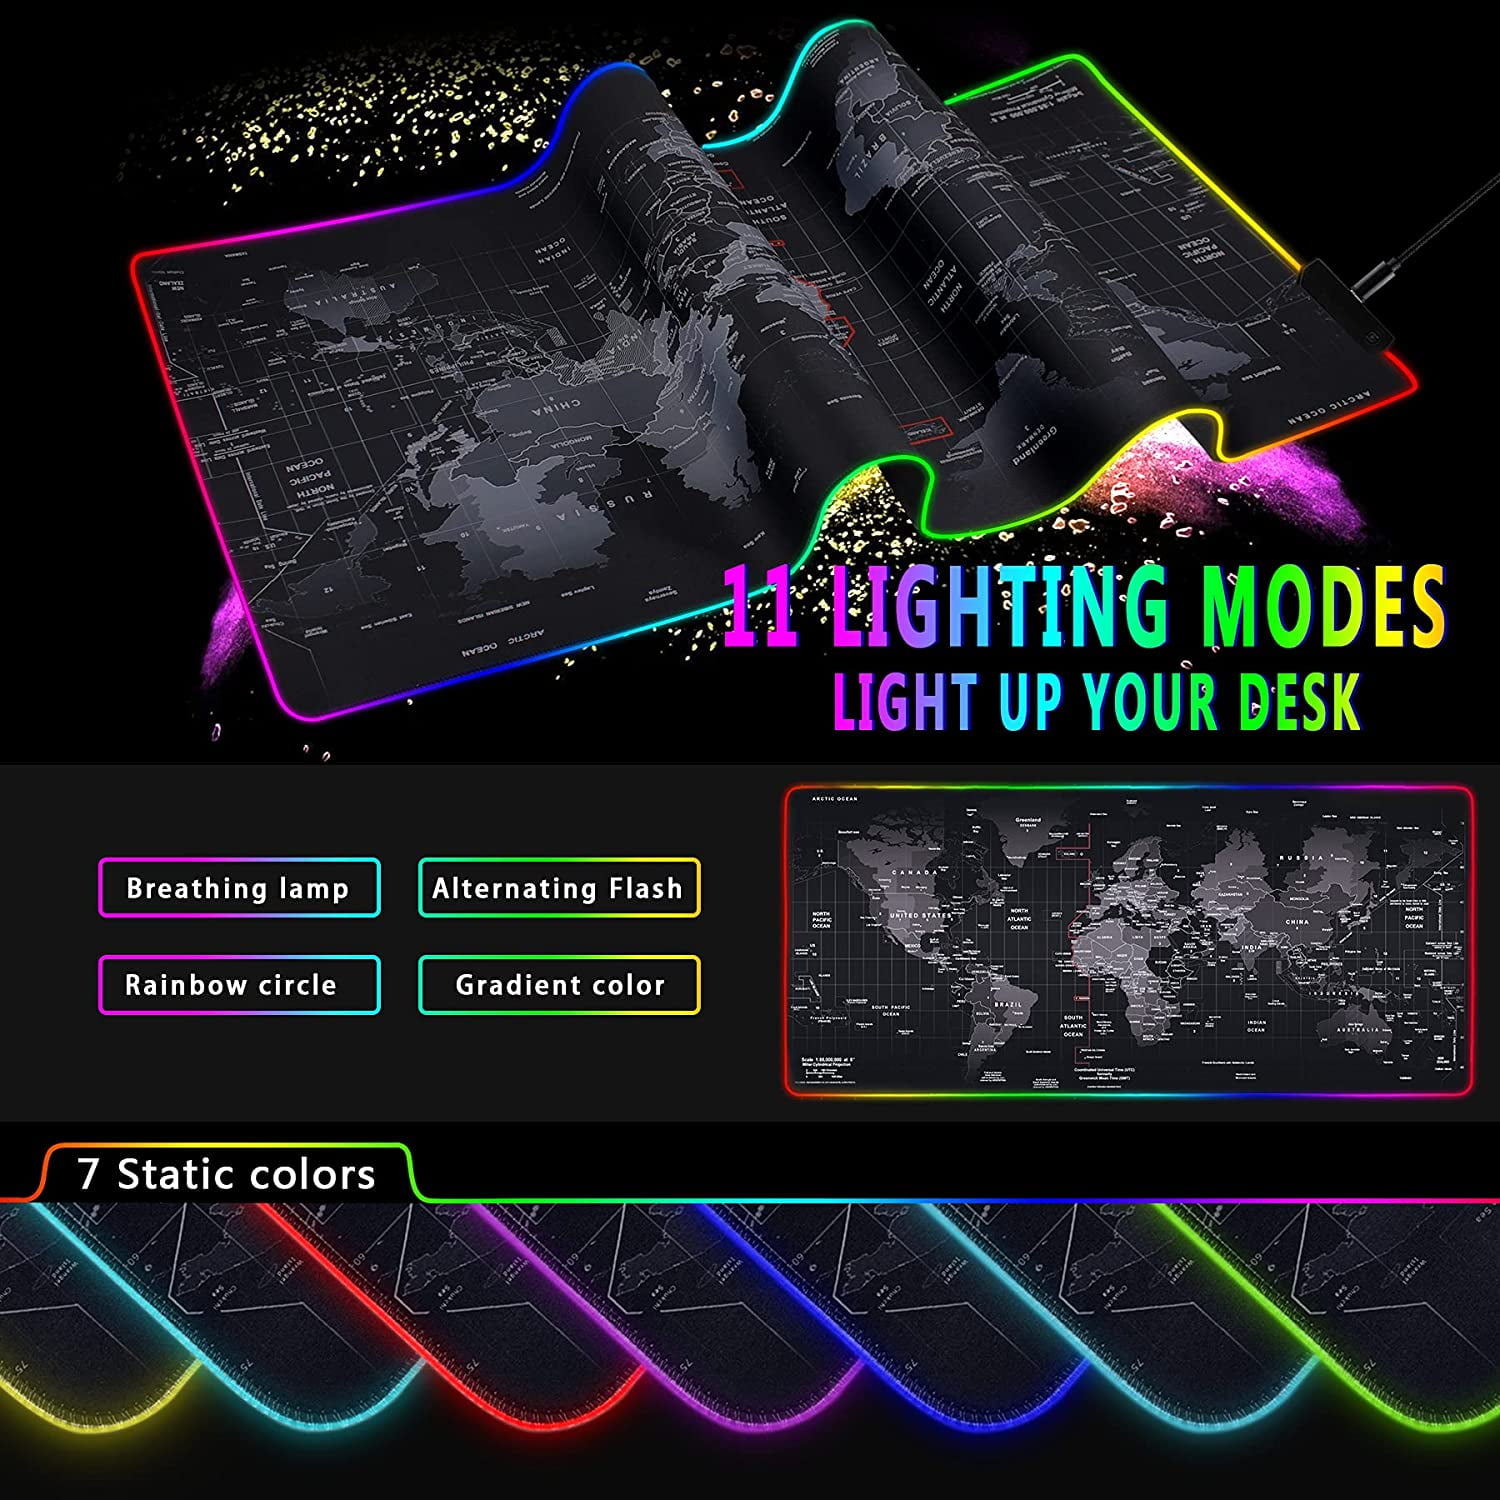 World Map RGB Gaming Mouse Pad Water Resistance Ultra Bright LED Light&Soft Large Extended Mousepad with 12 Lighting Rainbow Modes 31.5 X12 inch Non-Slip Rubber Base Keyboard Pad Mat 